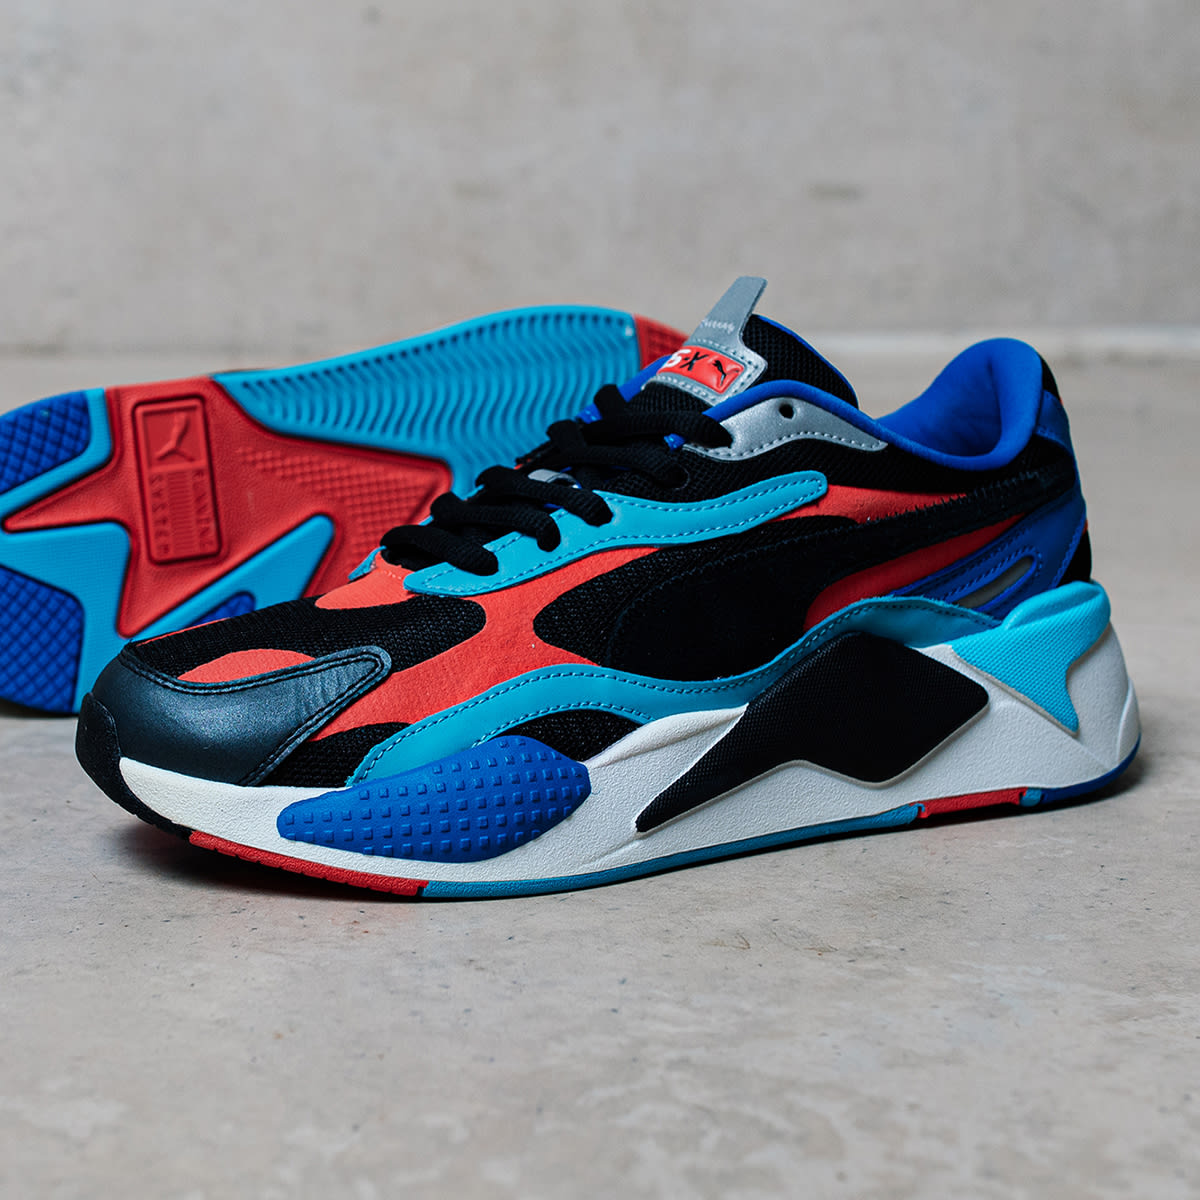 Puma RS-X³ LEVEL UP (Puma Black & Hot Coral) | END. Launches